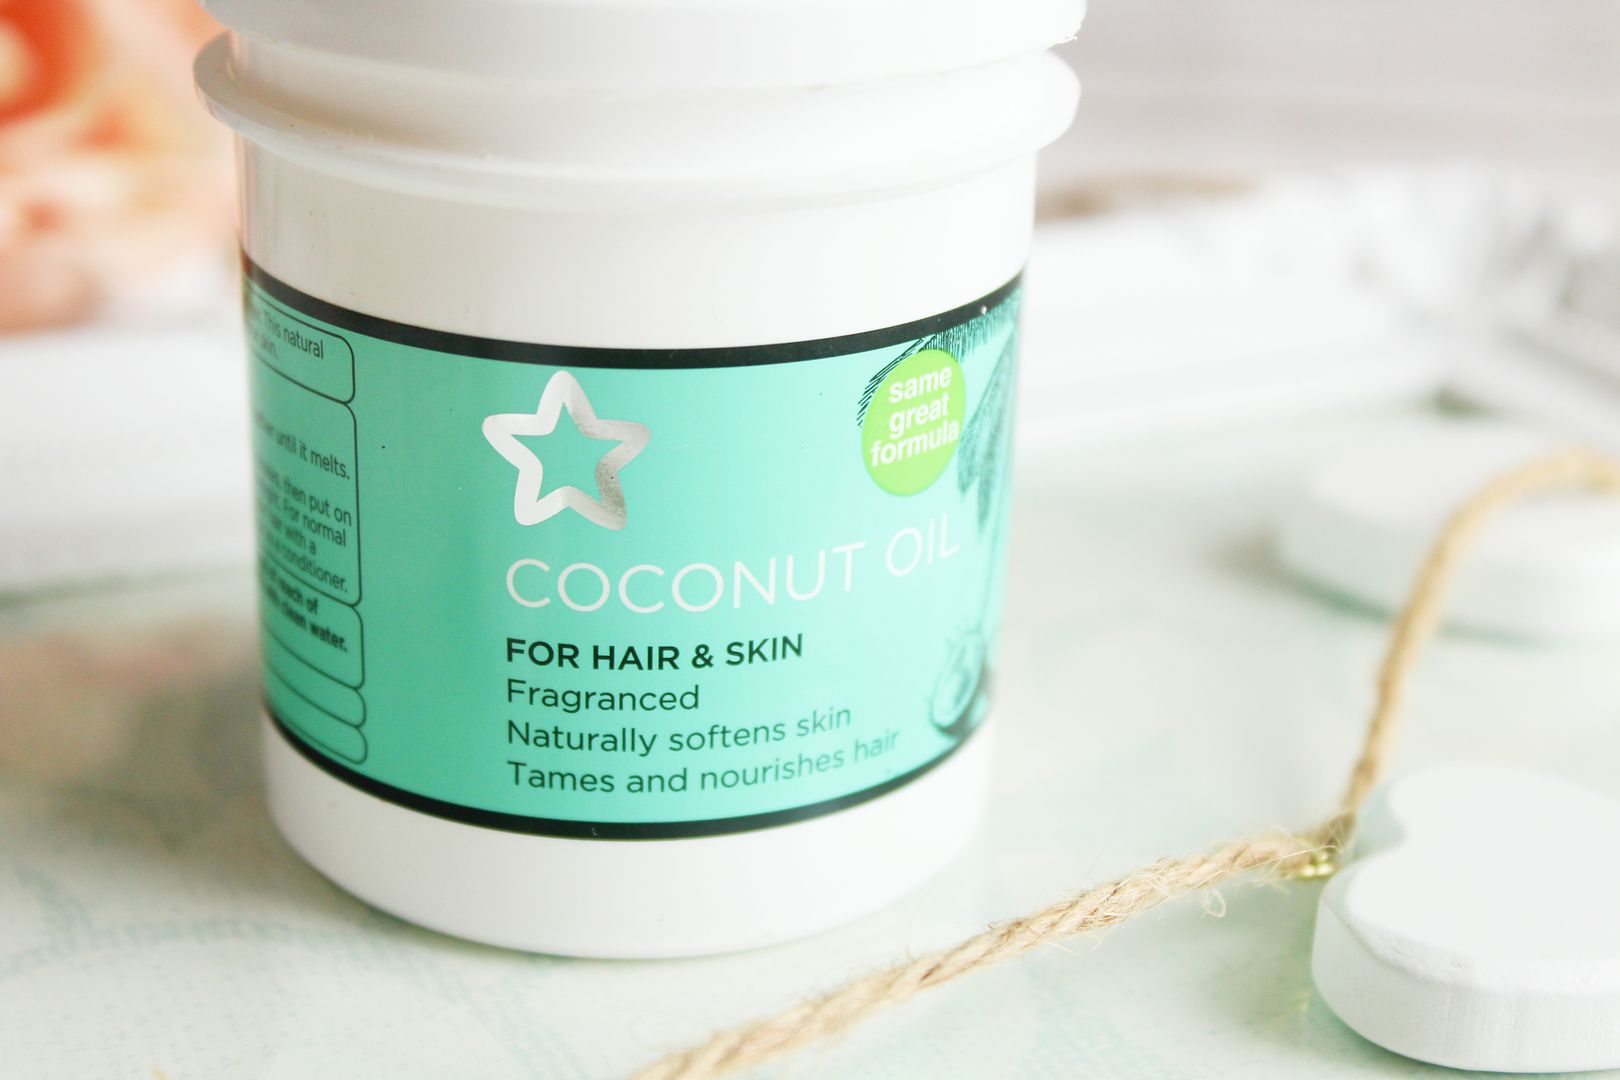 Superdrug Coconut Oil For Hair Skin Review Belle-Amie UK Beauty Fashion Lifestyle Blog